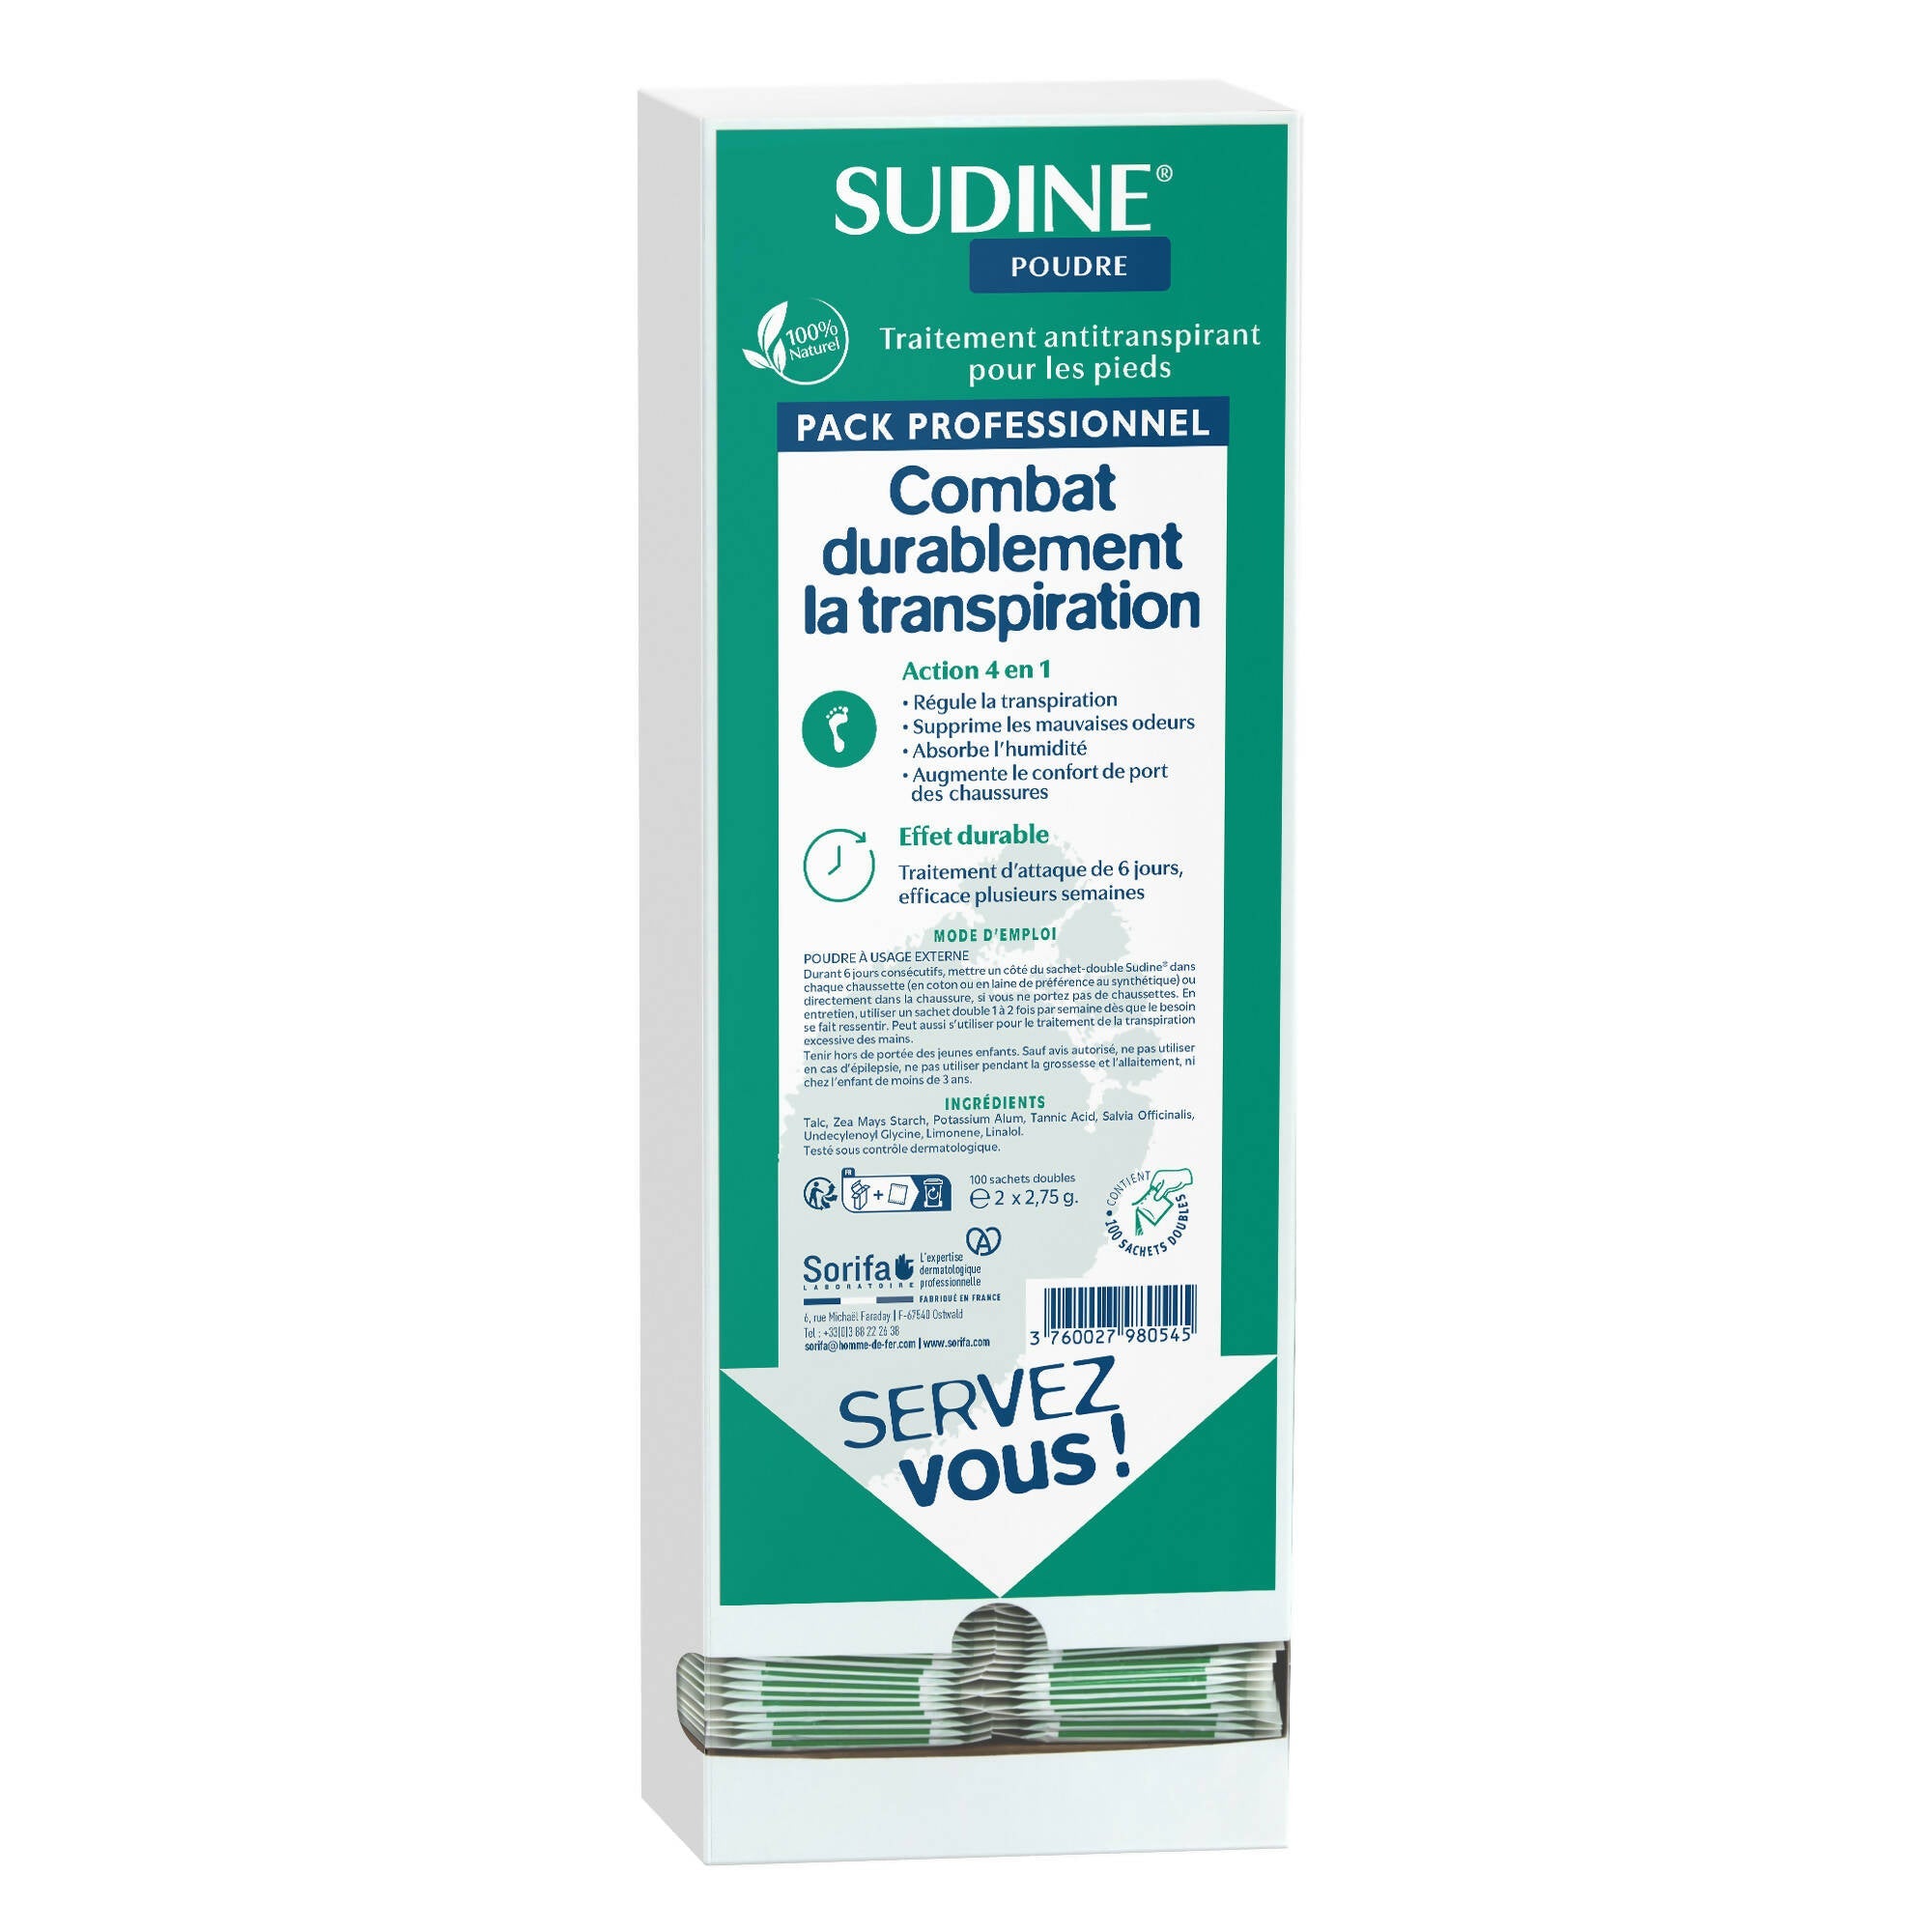 SORIFA - Set of 2 - Sudine Powder Antiperspirant Treatment - Foot - Regulates perspiration - Absorbs - Prevents mycoses - Without aluminum salts - Made in France - Box of 100 double sachets - 0